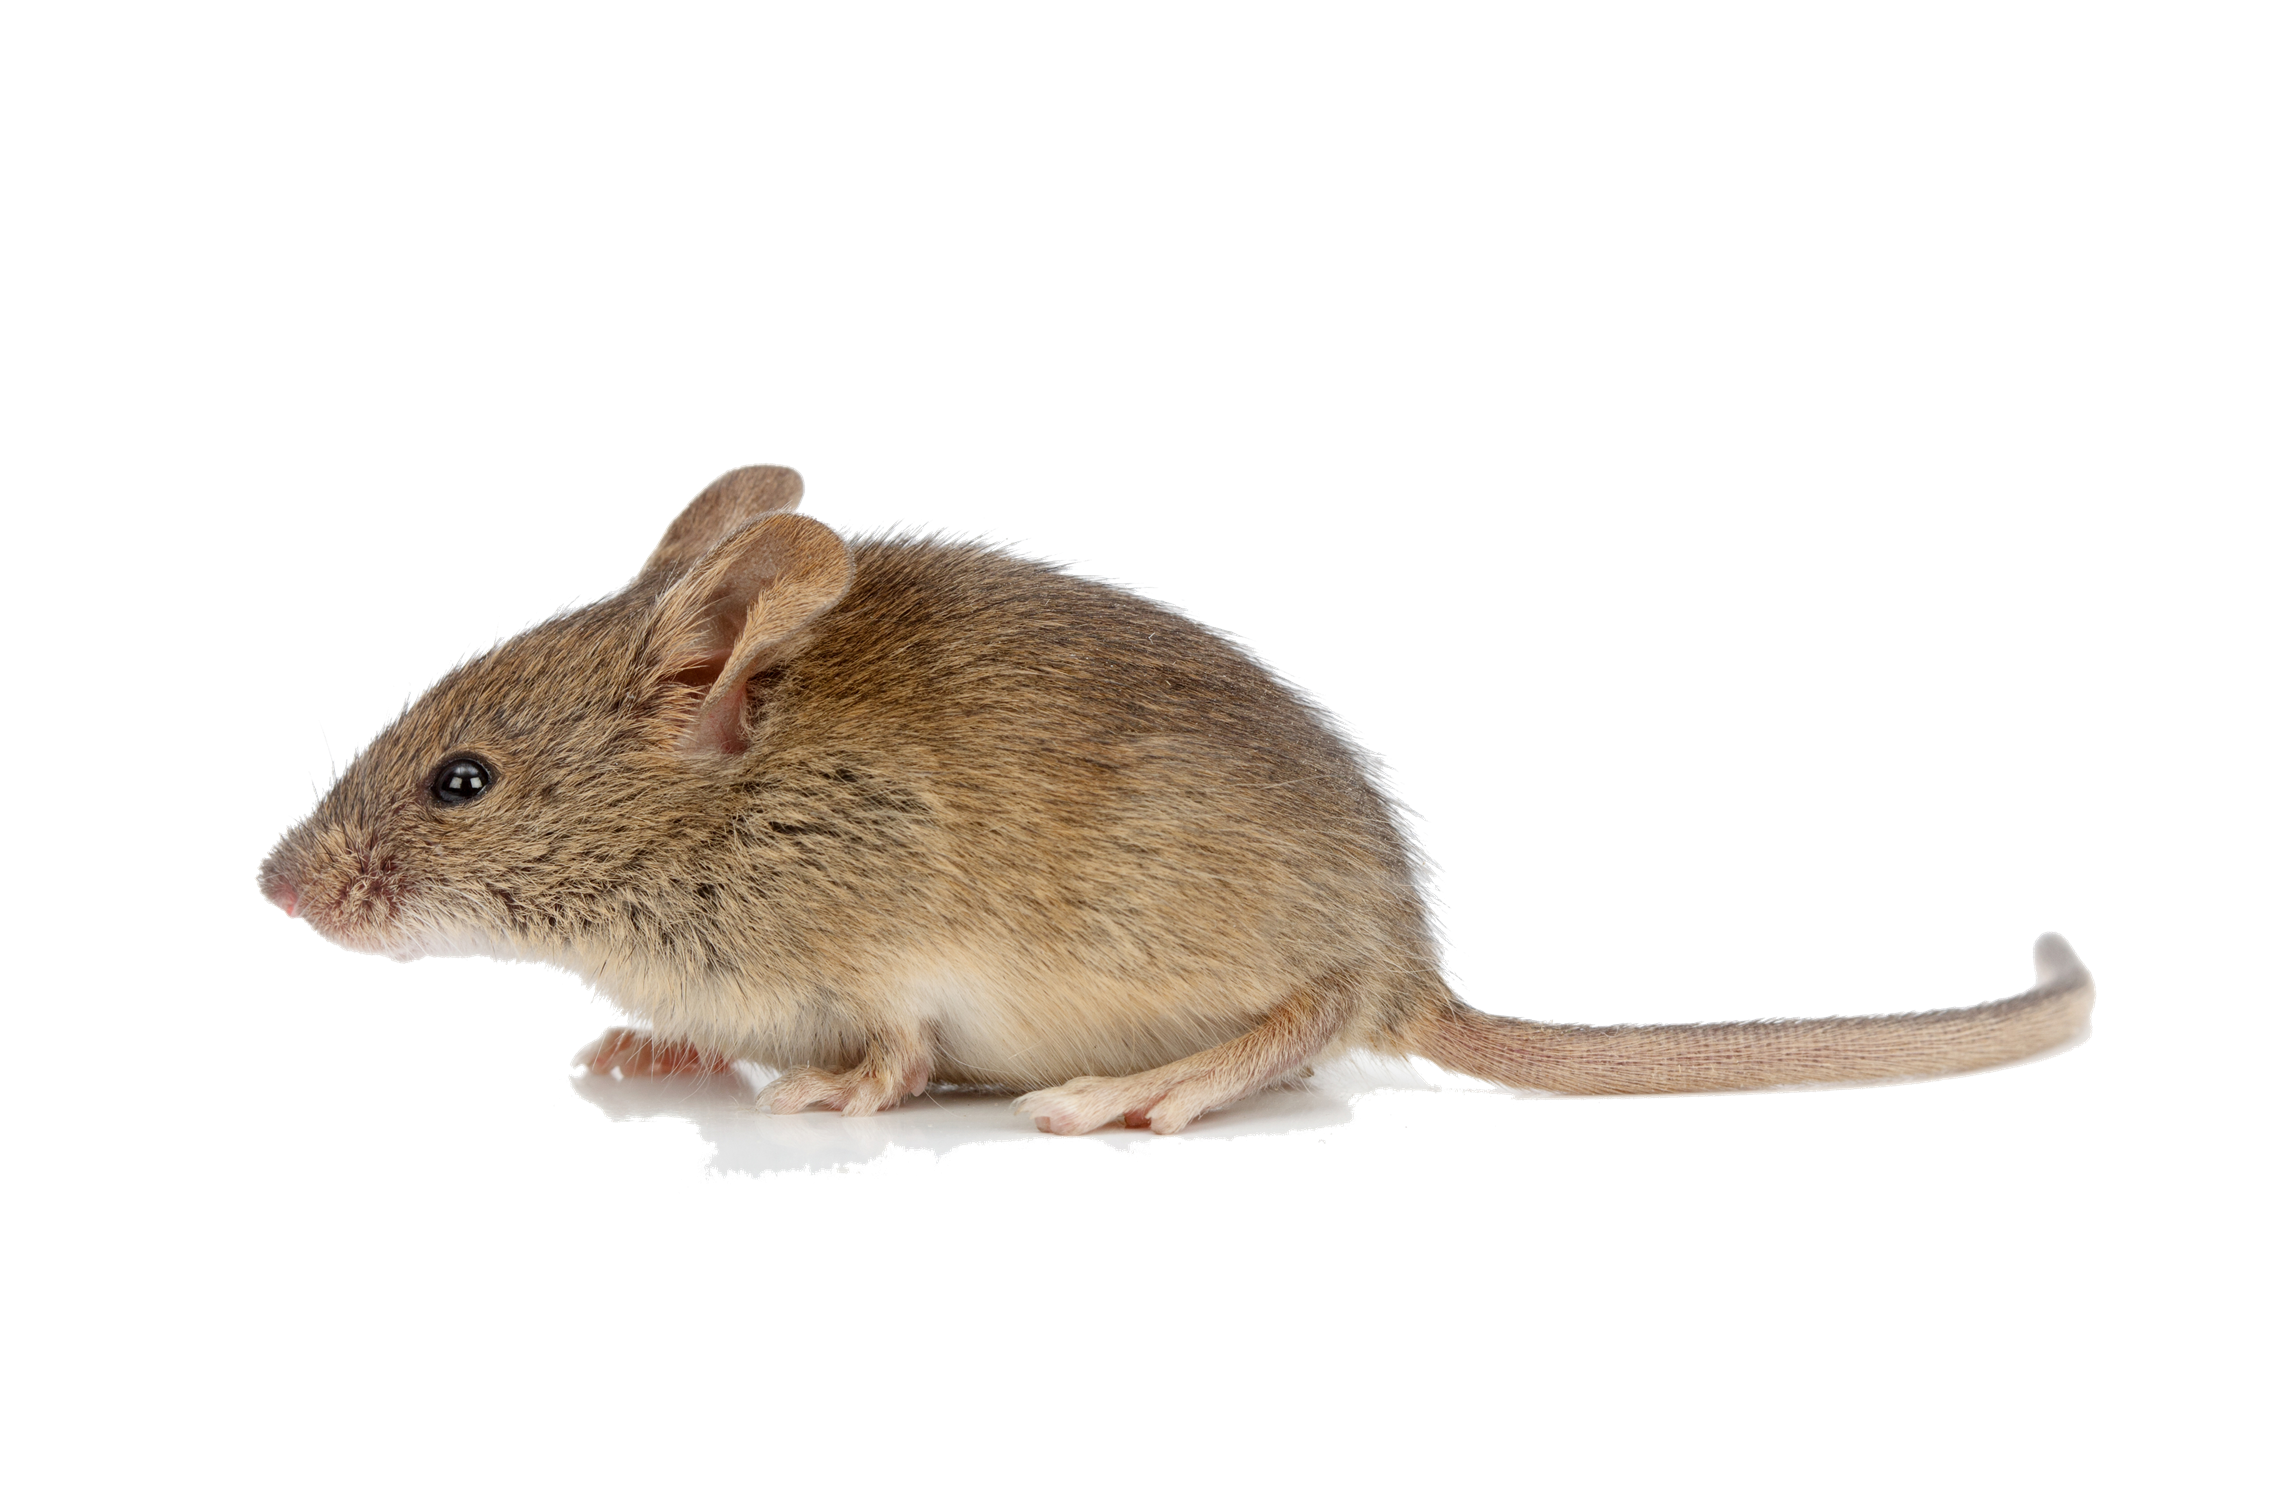 Mouse Animal (Mice) PNG Transparent Images | PNG All